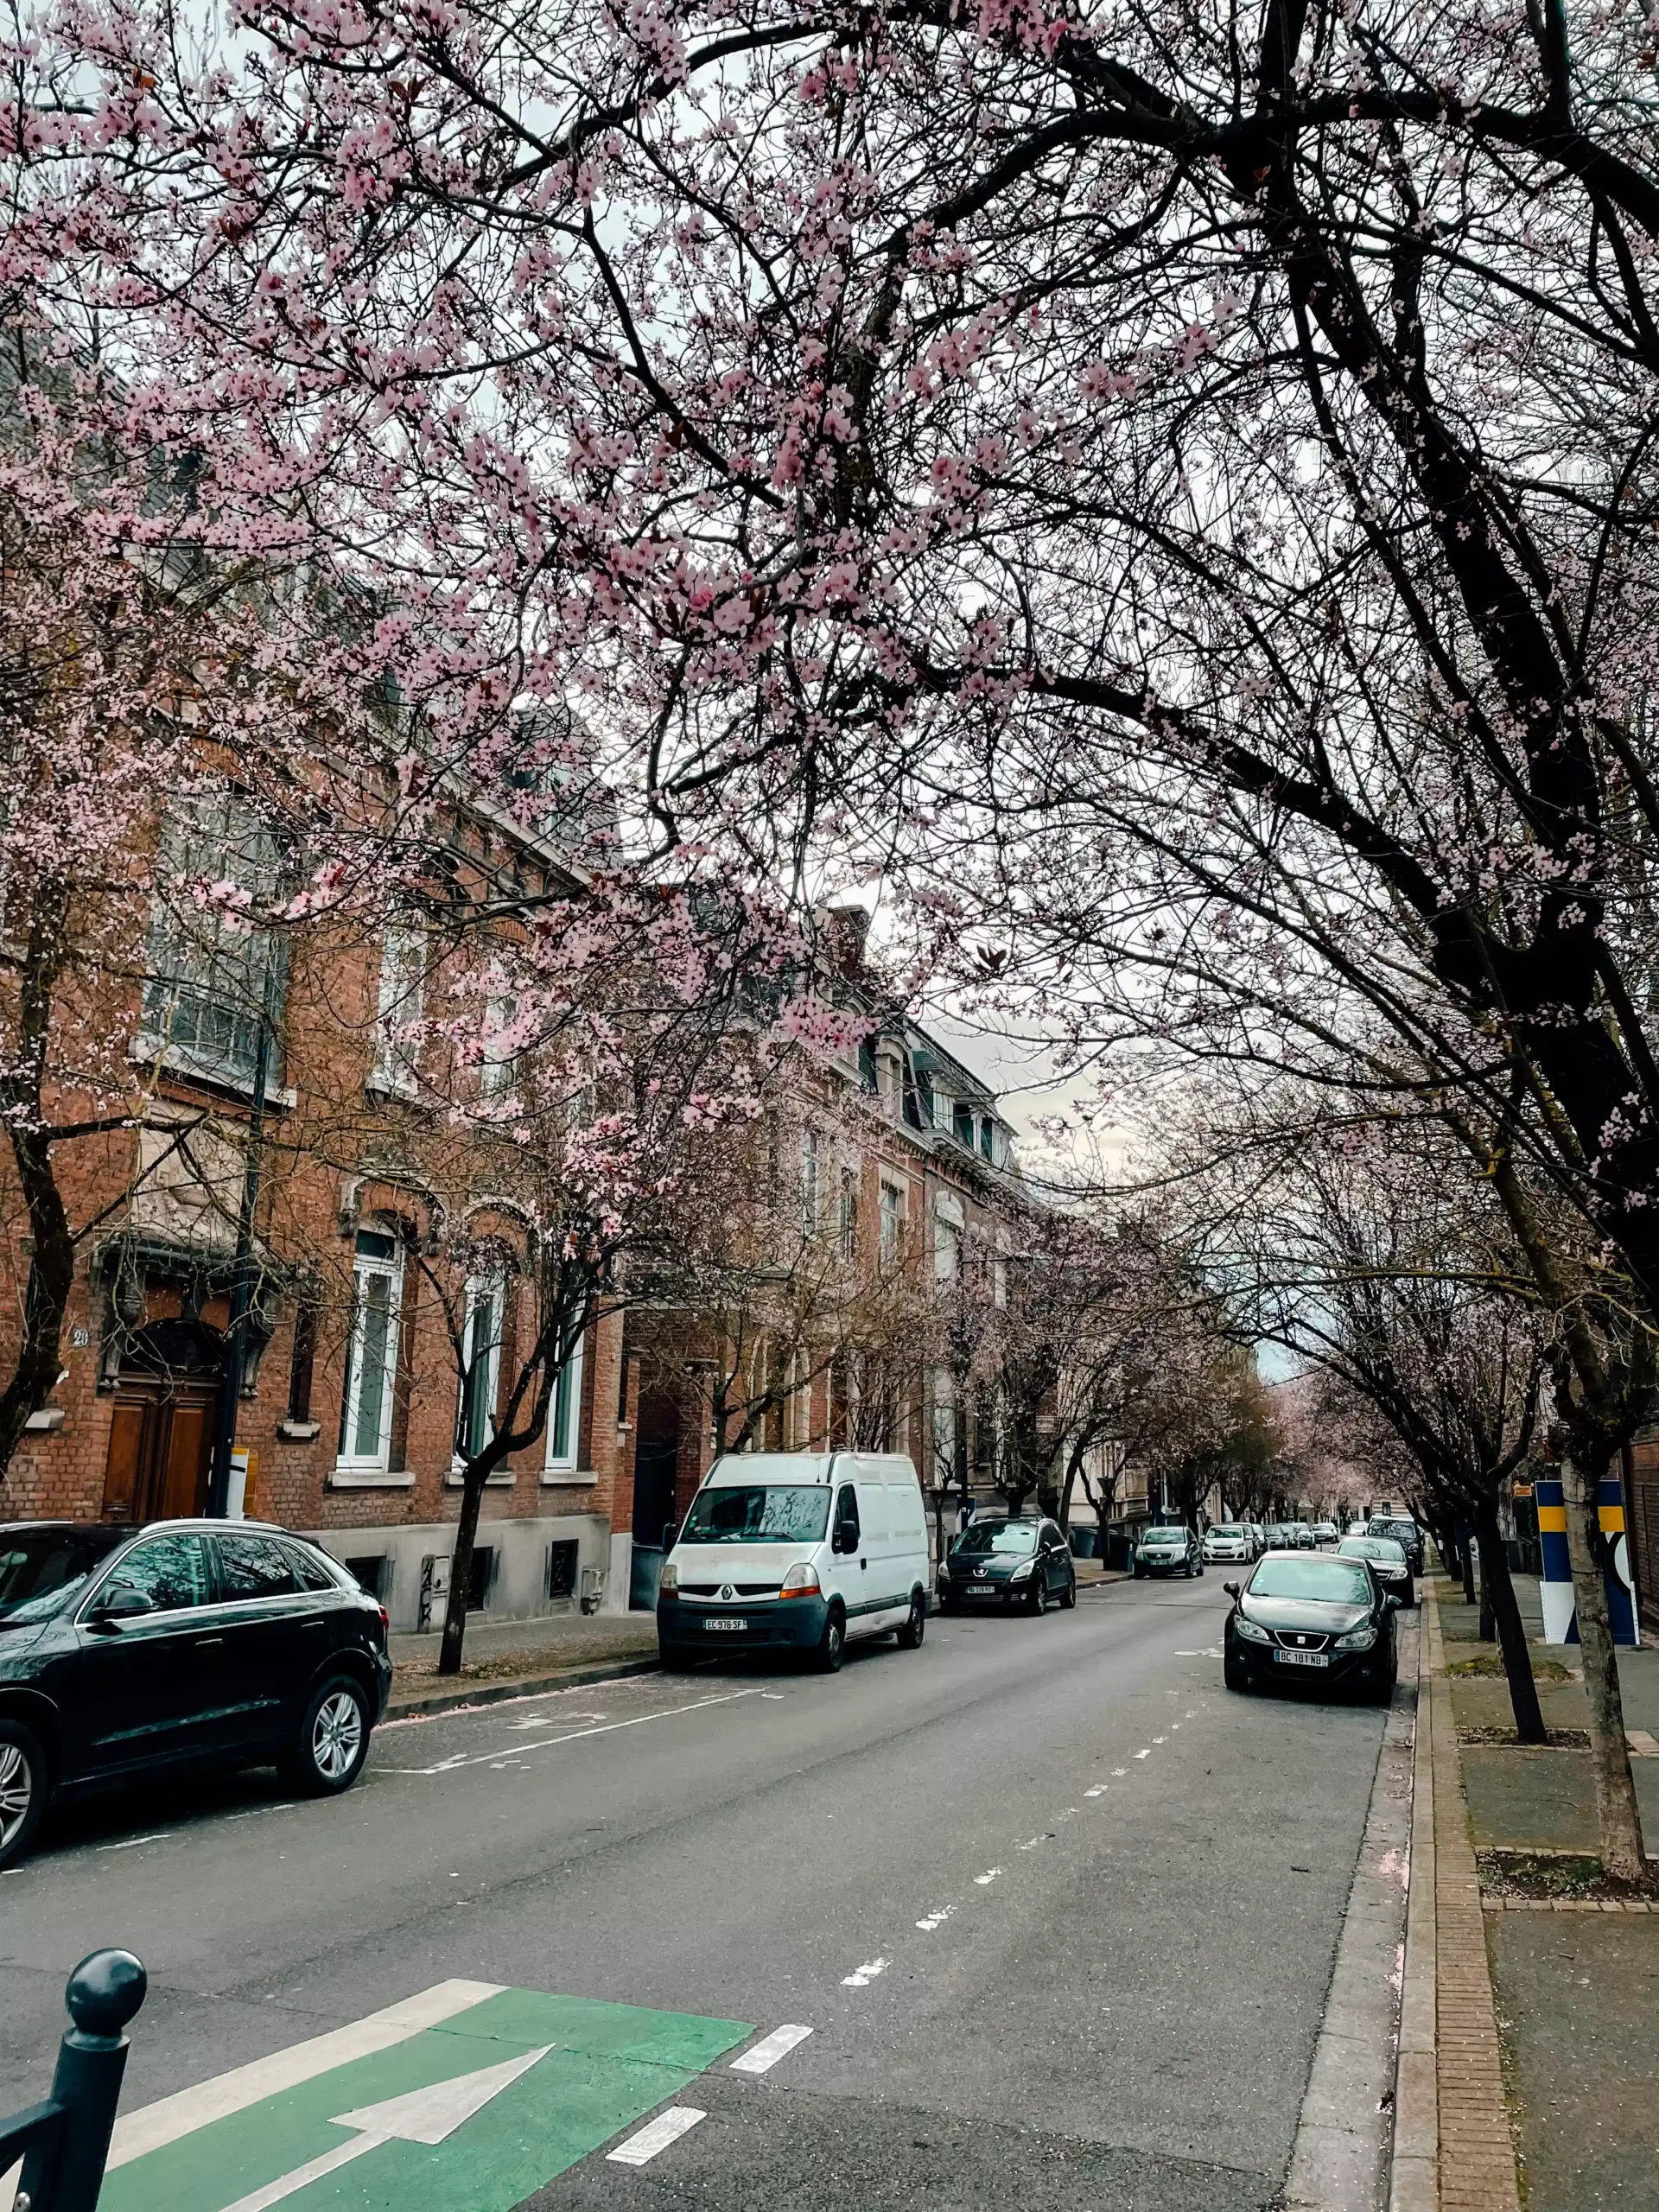 A residential street in France in the spring time with colour trees lining the street and several cars parked